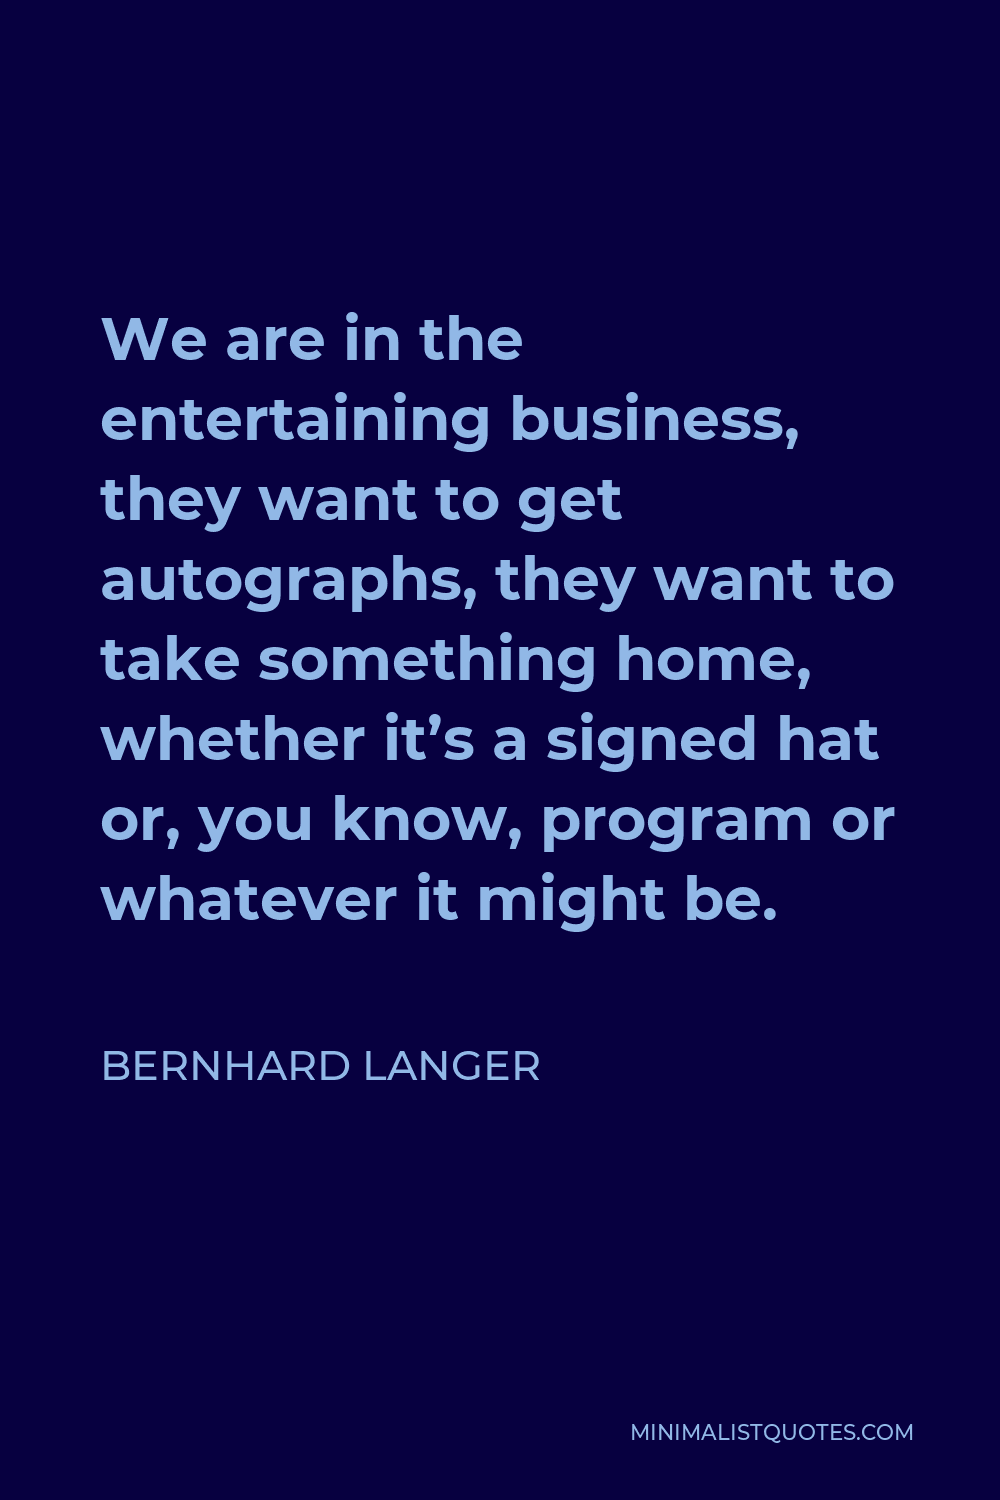 Bernhard Langer Quote - We are in the entertaining business, they want to get autographs, they want to take something home, whether it’s a signed hat or, you know, program or whatever it might be.